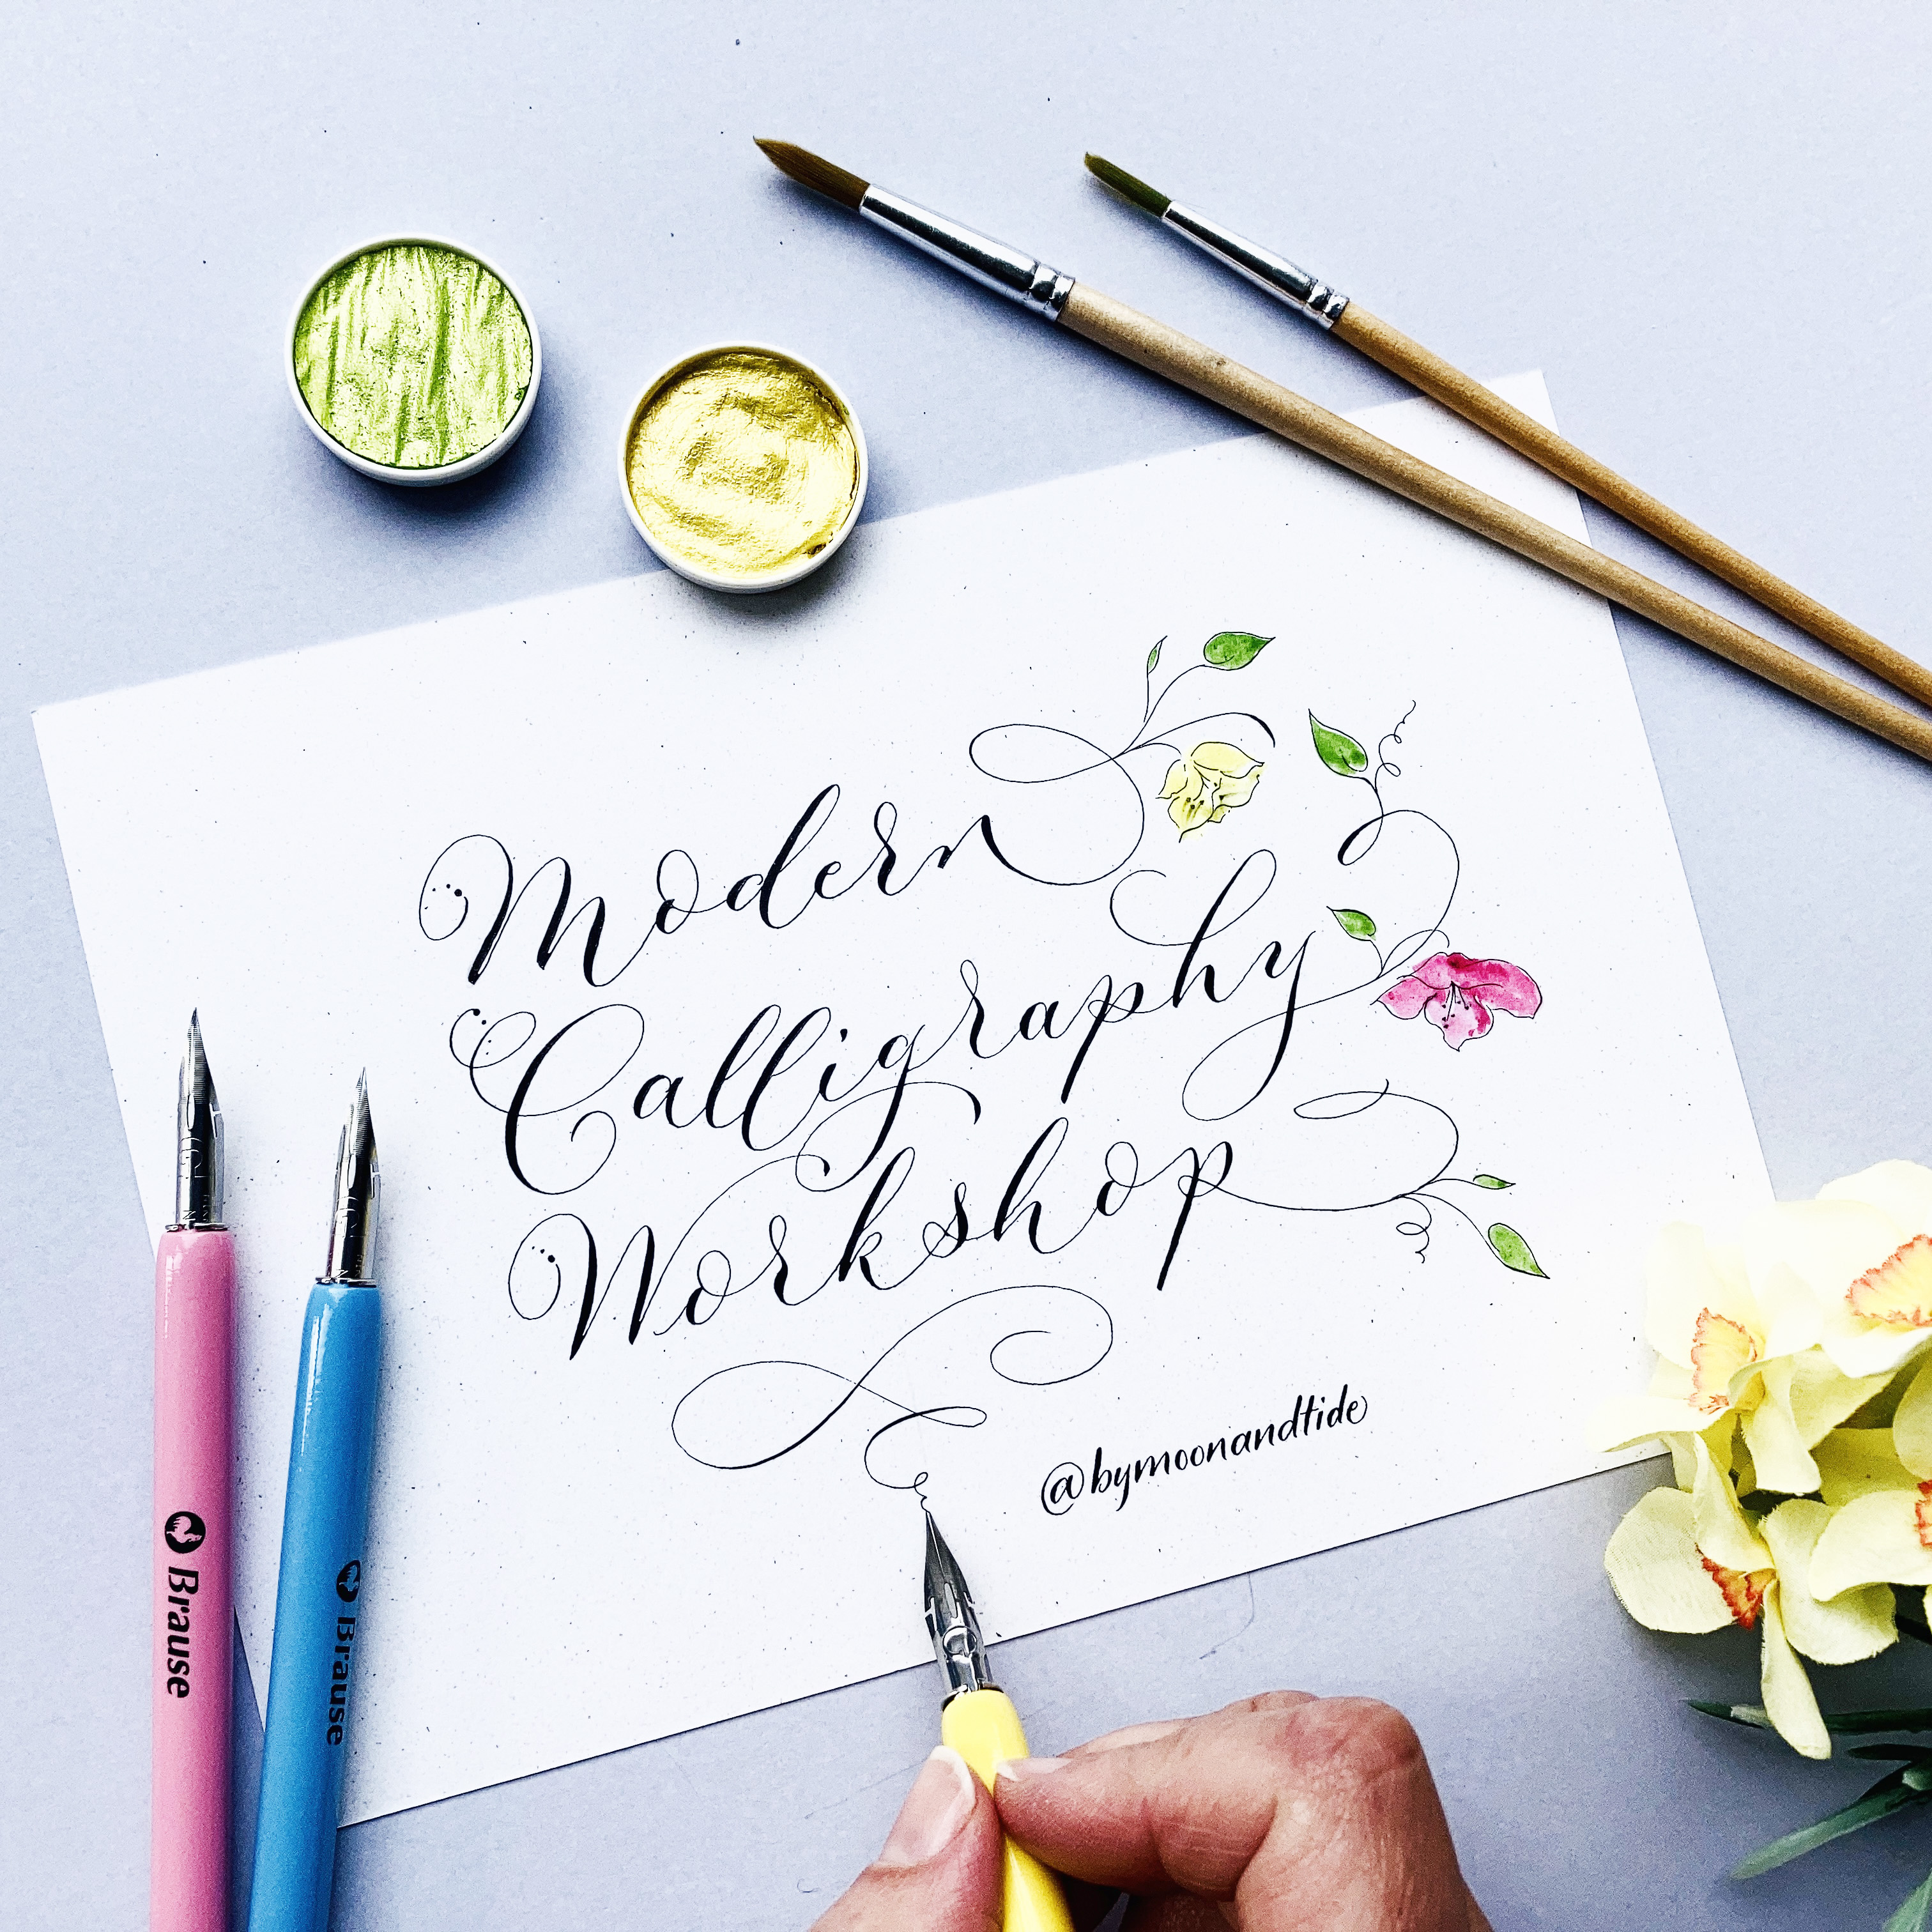 Calligraphy Workshop in Cumbria, the Lake District inc. Modern Calligraphy